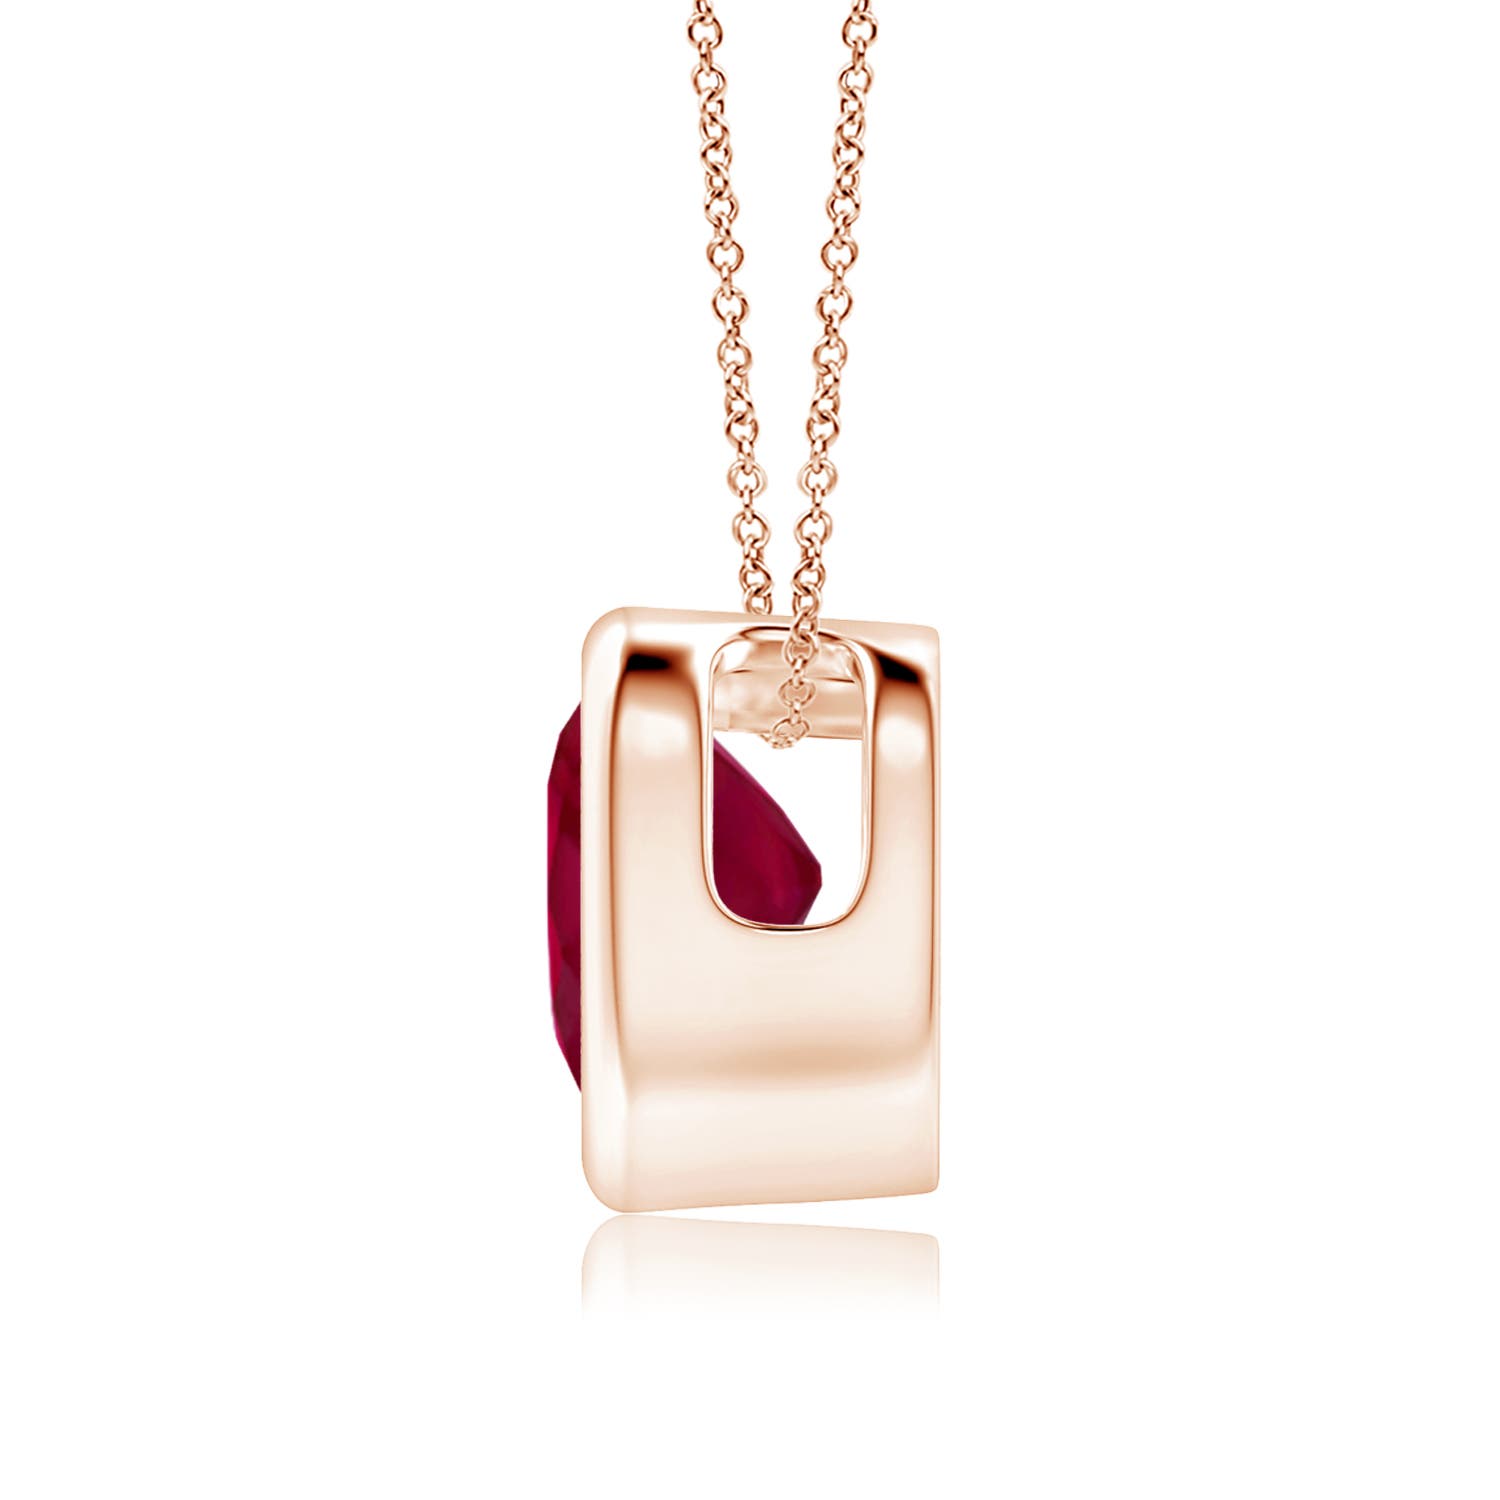 A - Ruby / 0.8 CT / 14 KT Rose Gold